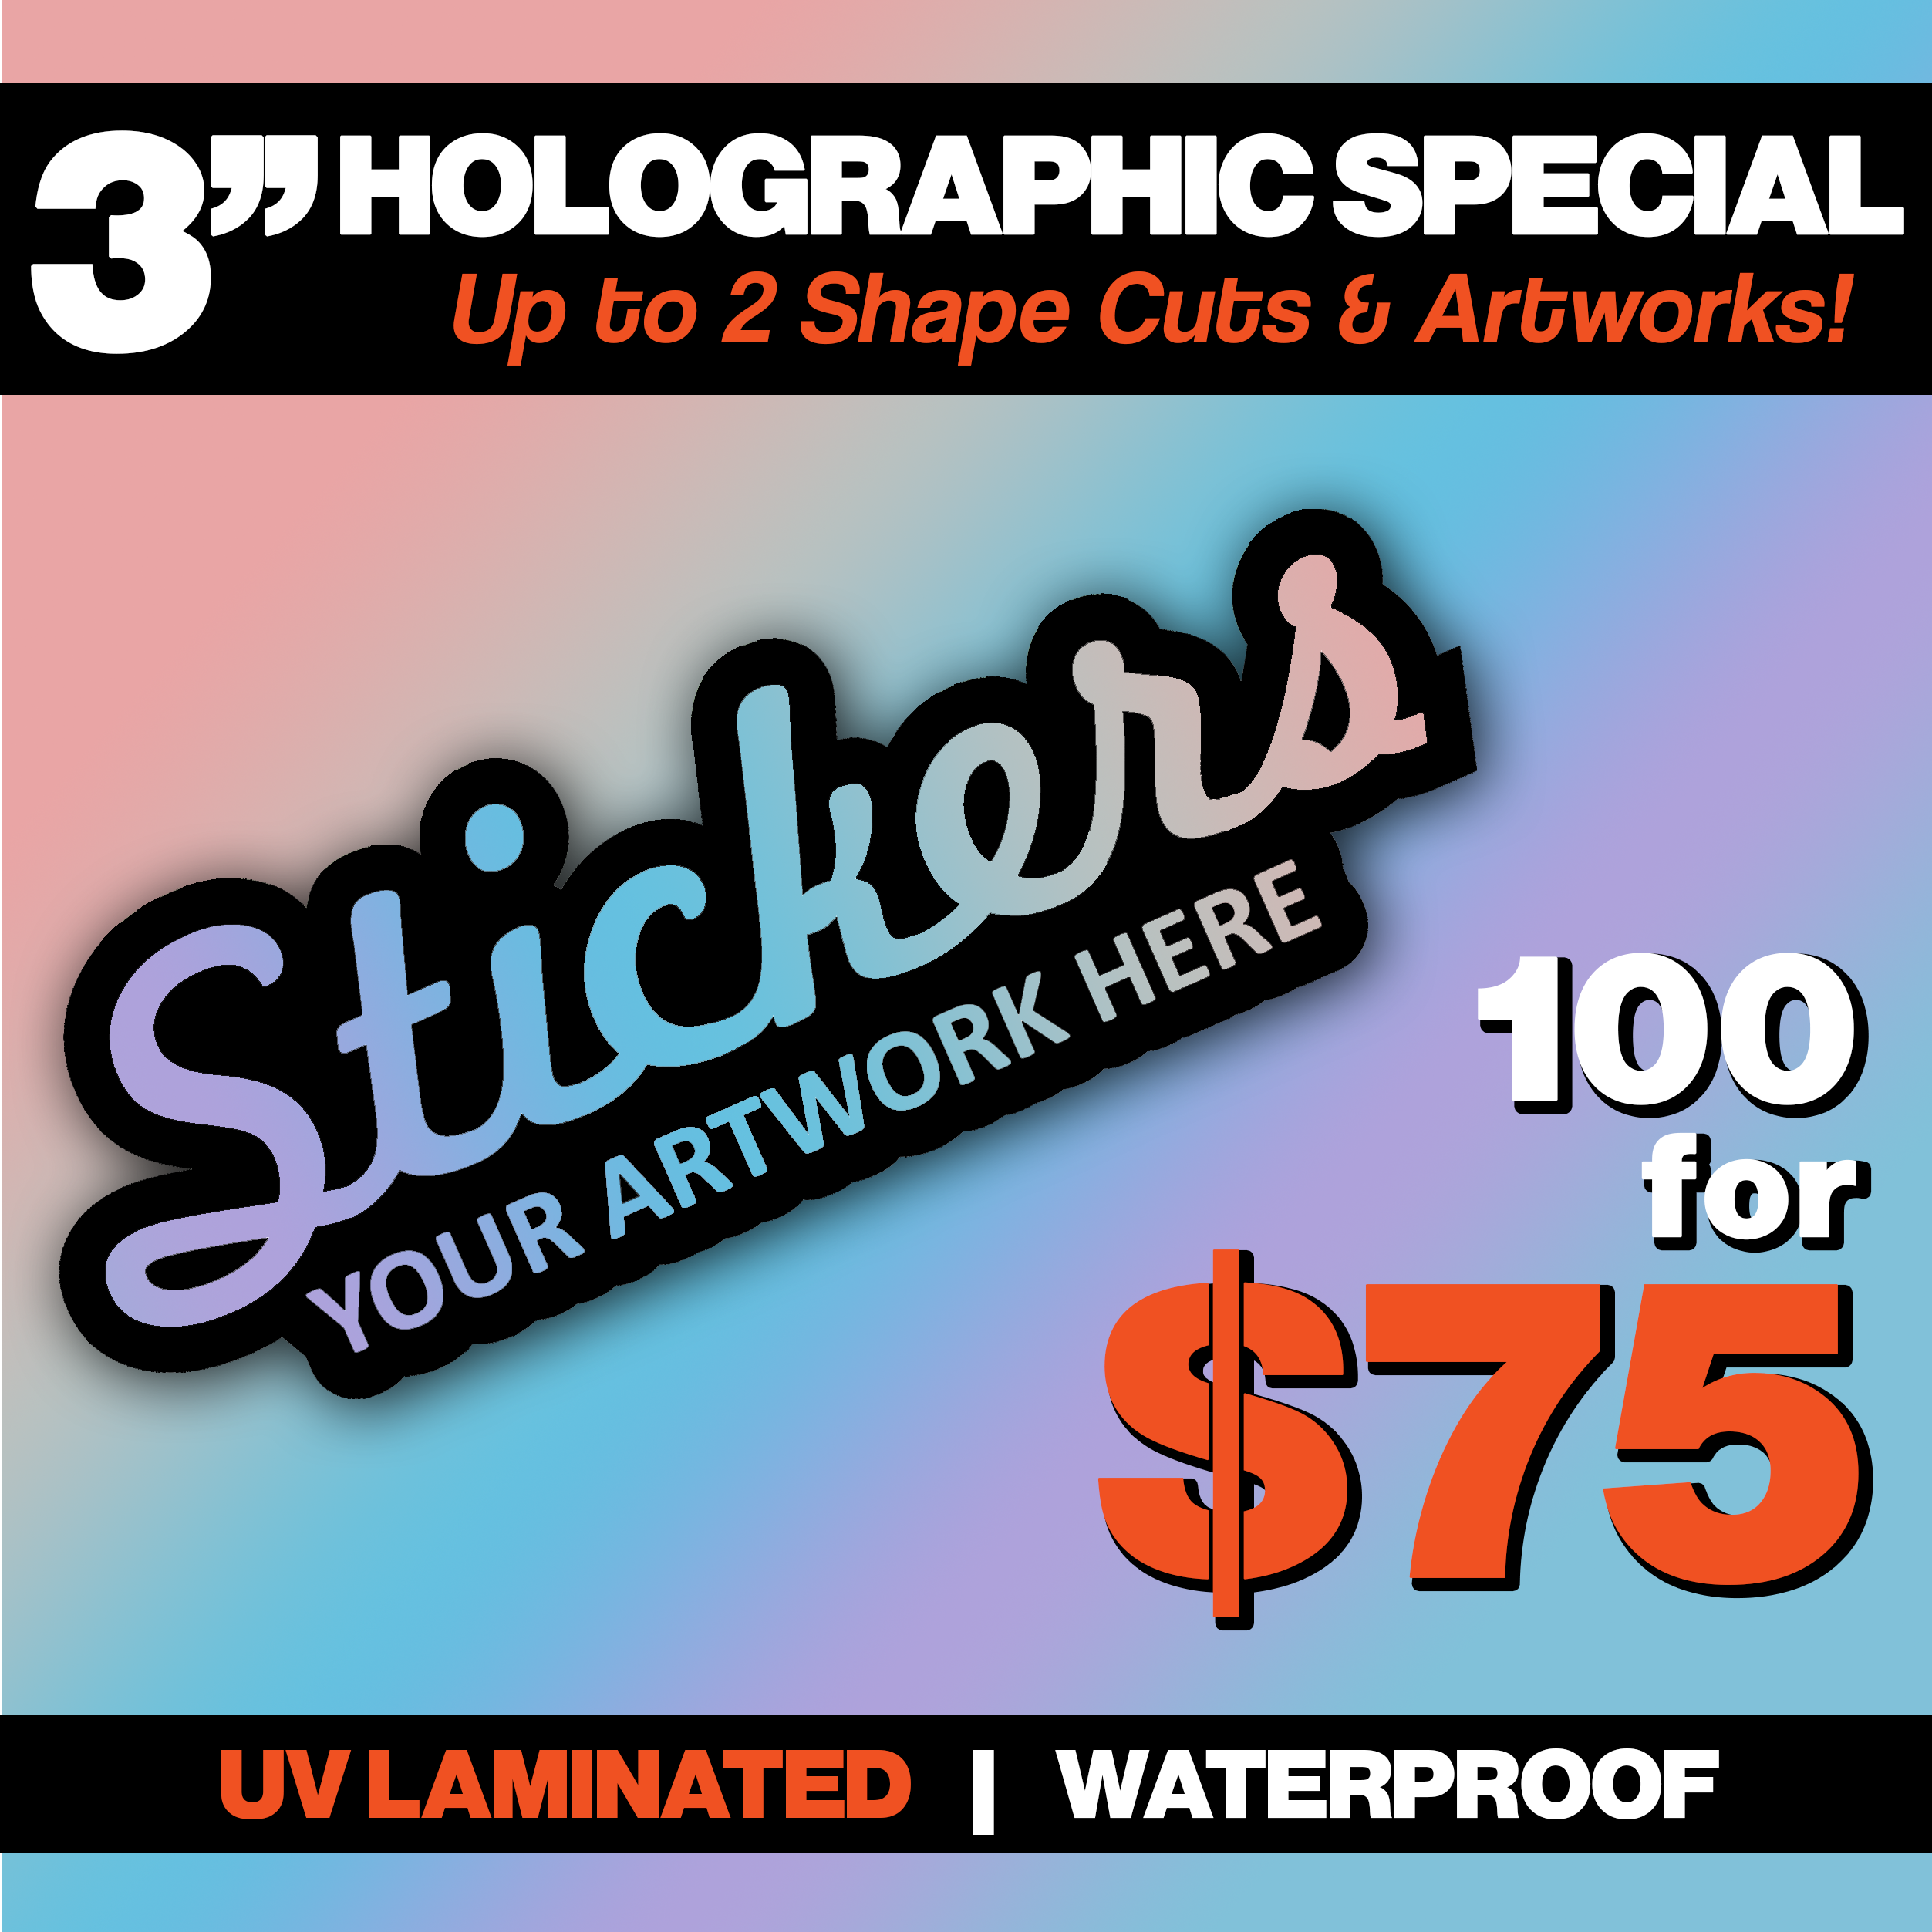 100 - 3" Holographic Sticker Special